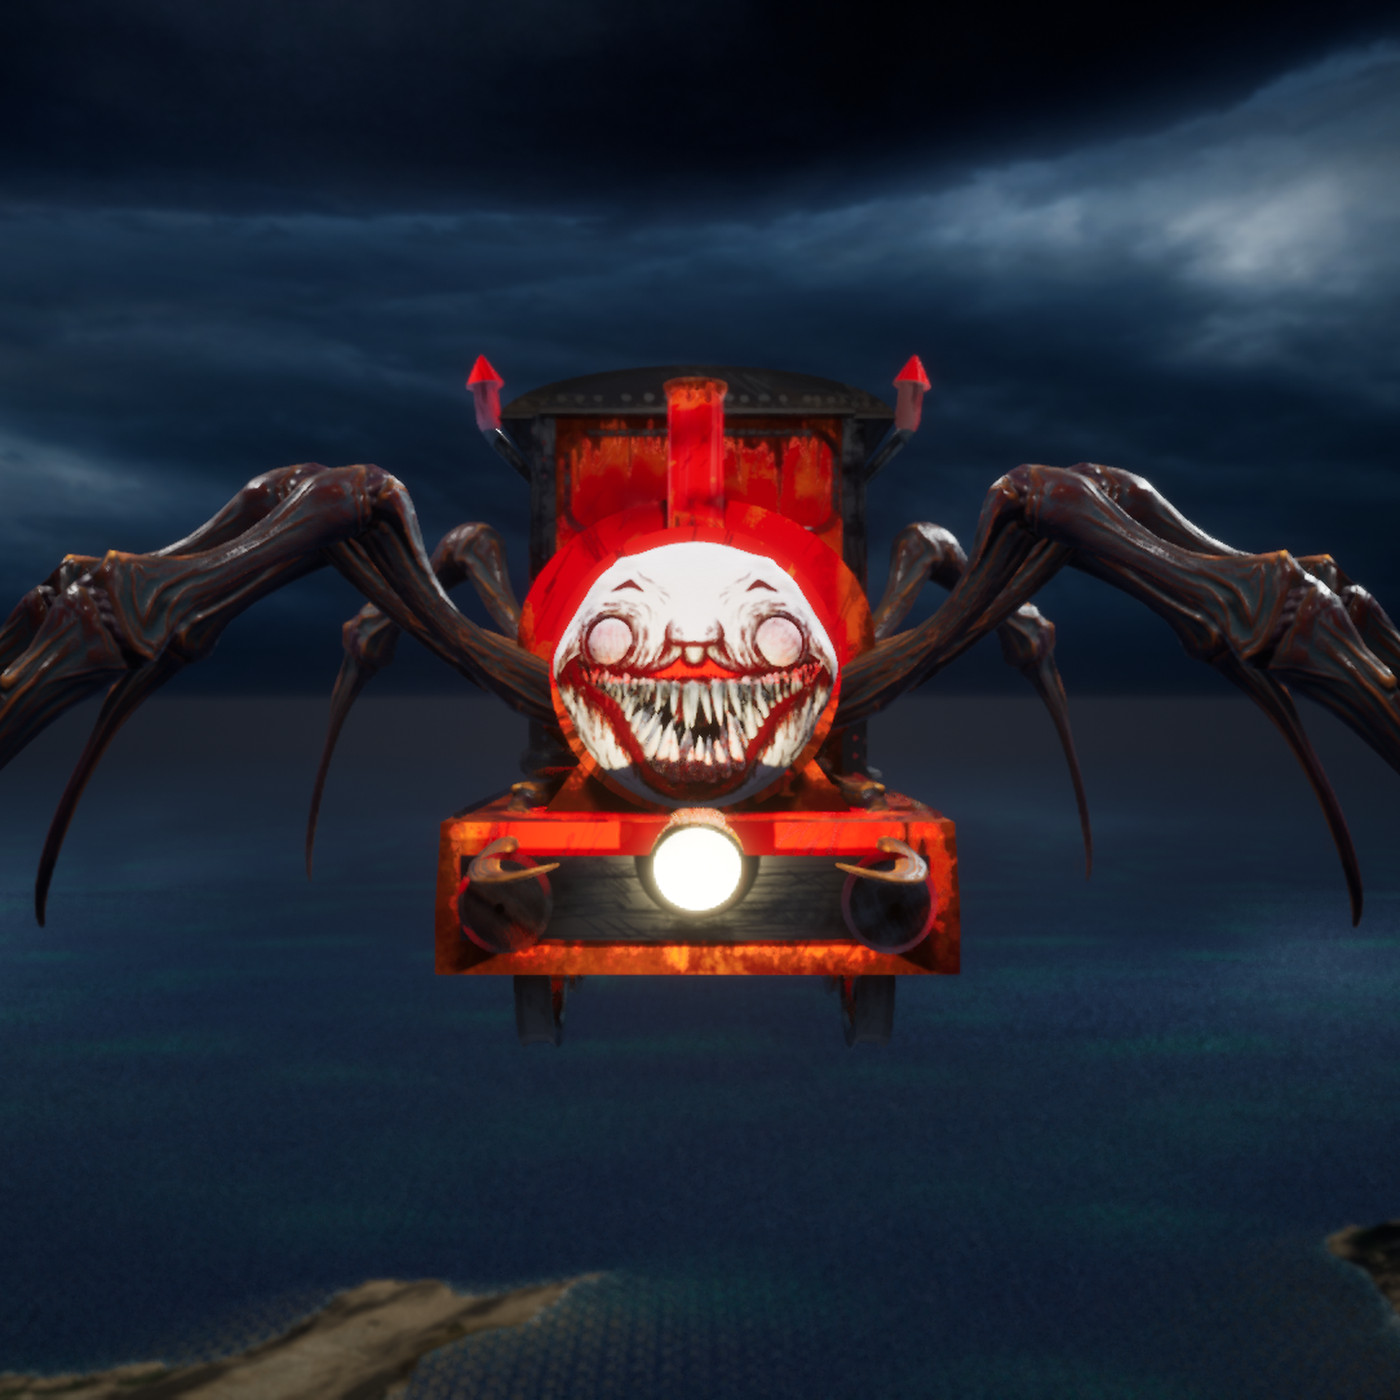 Spider Train Horror Game Choo Choo Charles Coming To Consoles